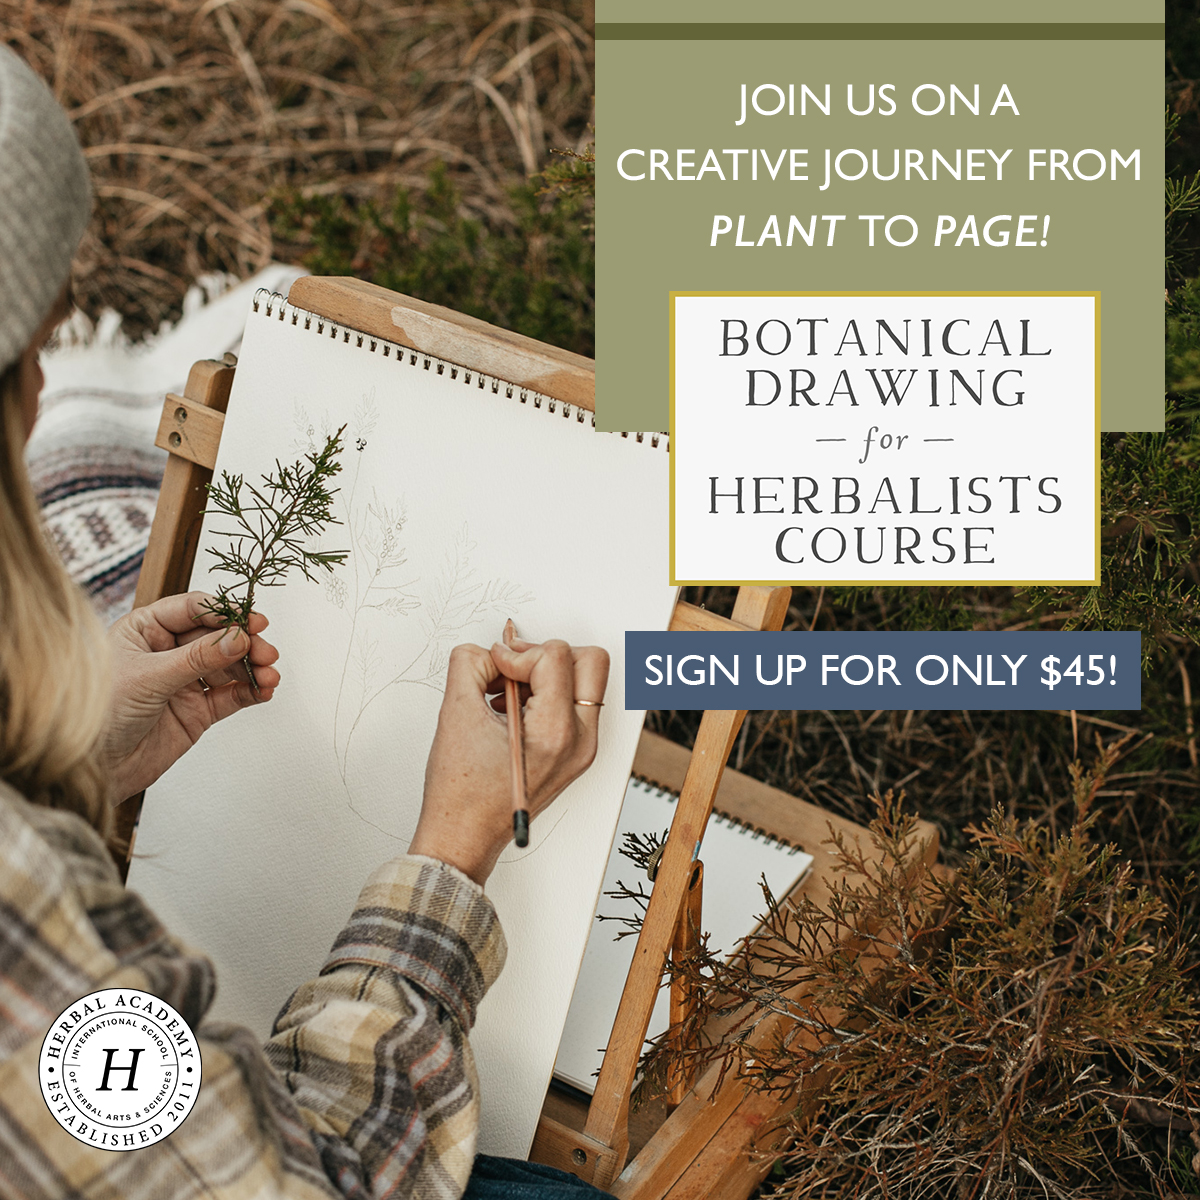 Enroll today in our brand NEW Botanical Drawing for Herbalists Course!